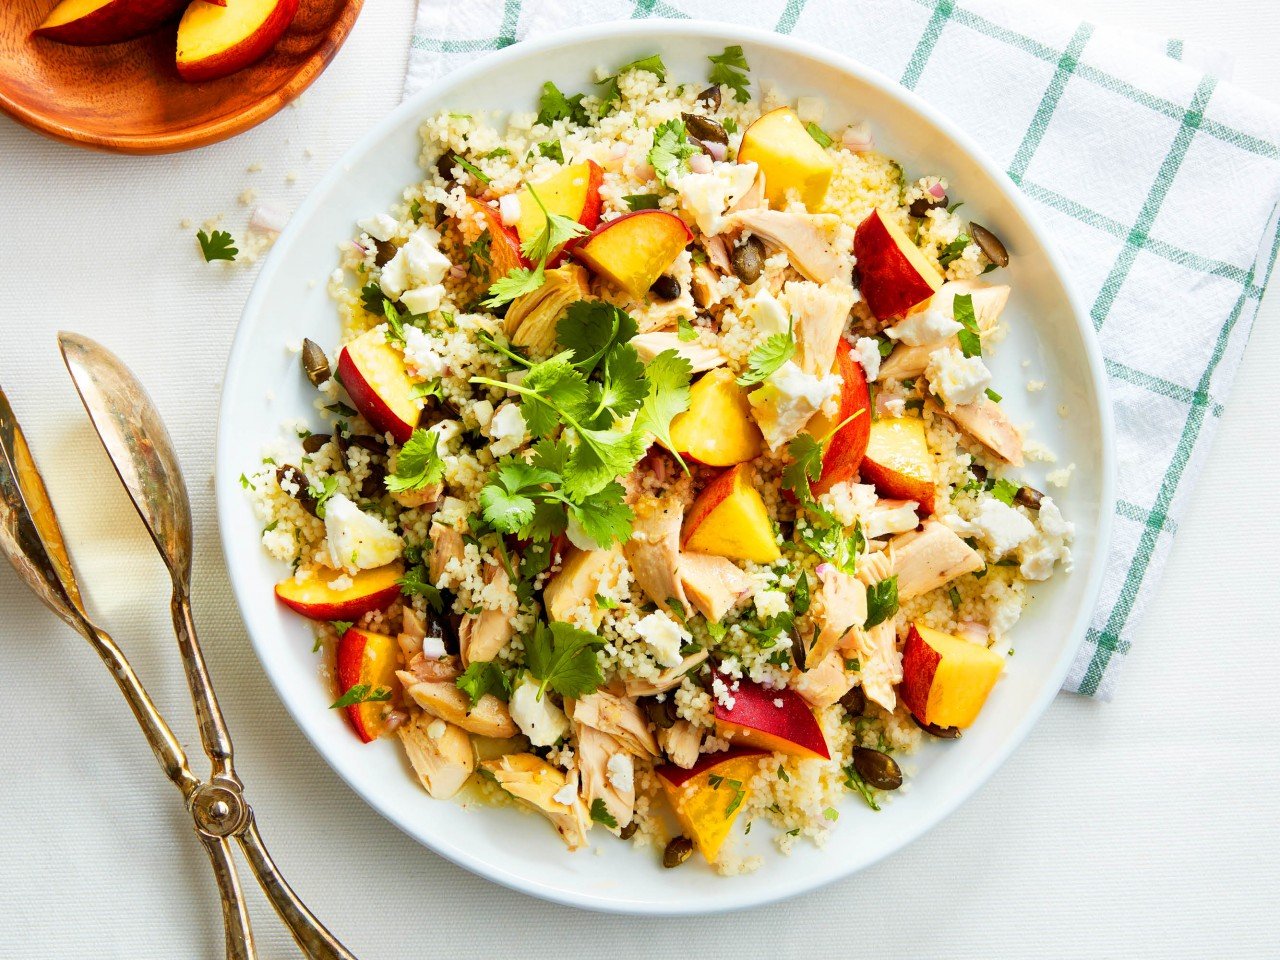 Peach and chicken couscous salad